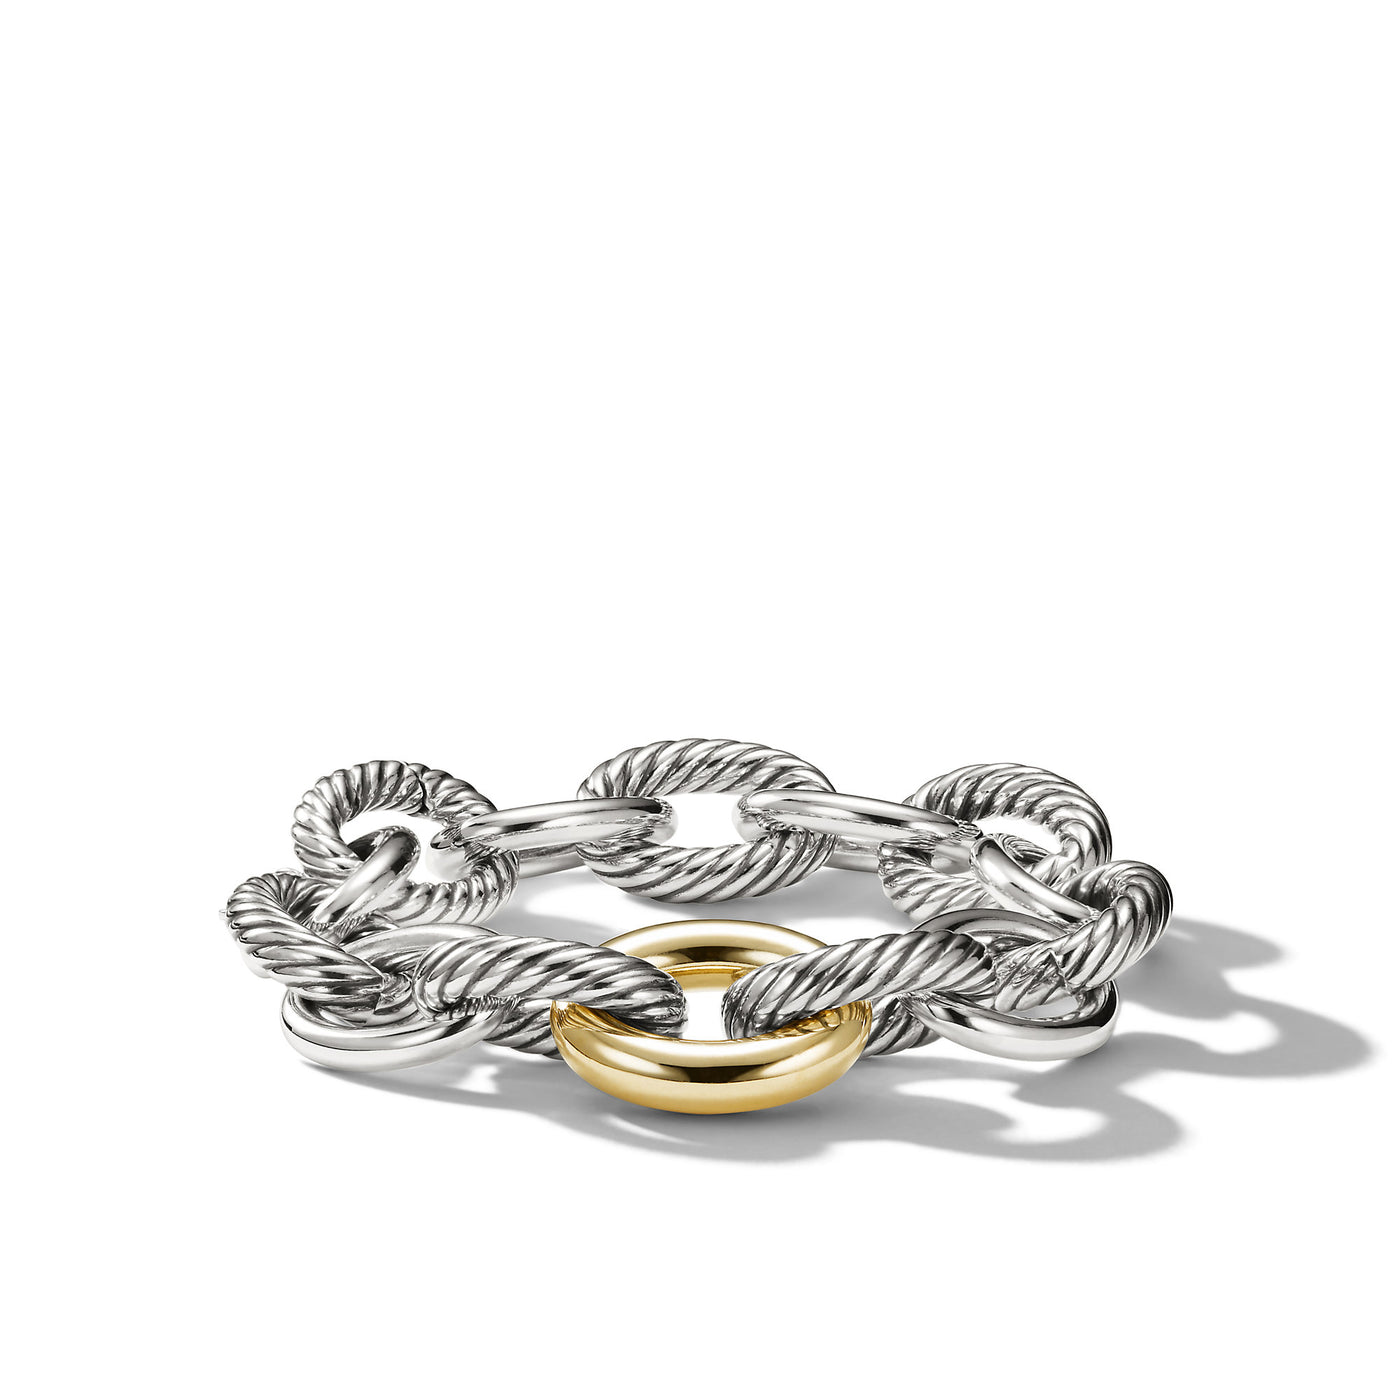 Oval Link Chain Bracelet in Sterling Silver with 18K Yellow Gold\, 19mm